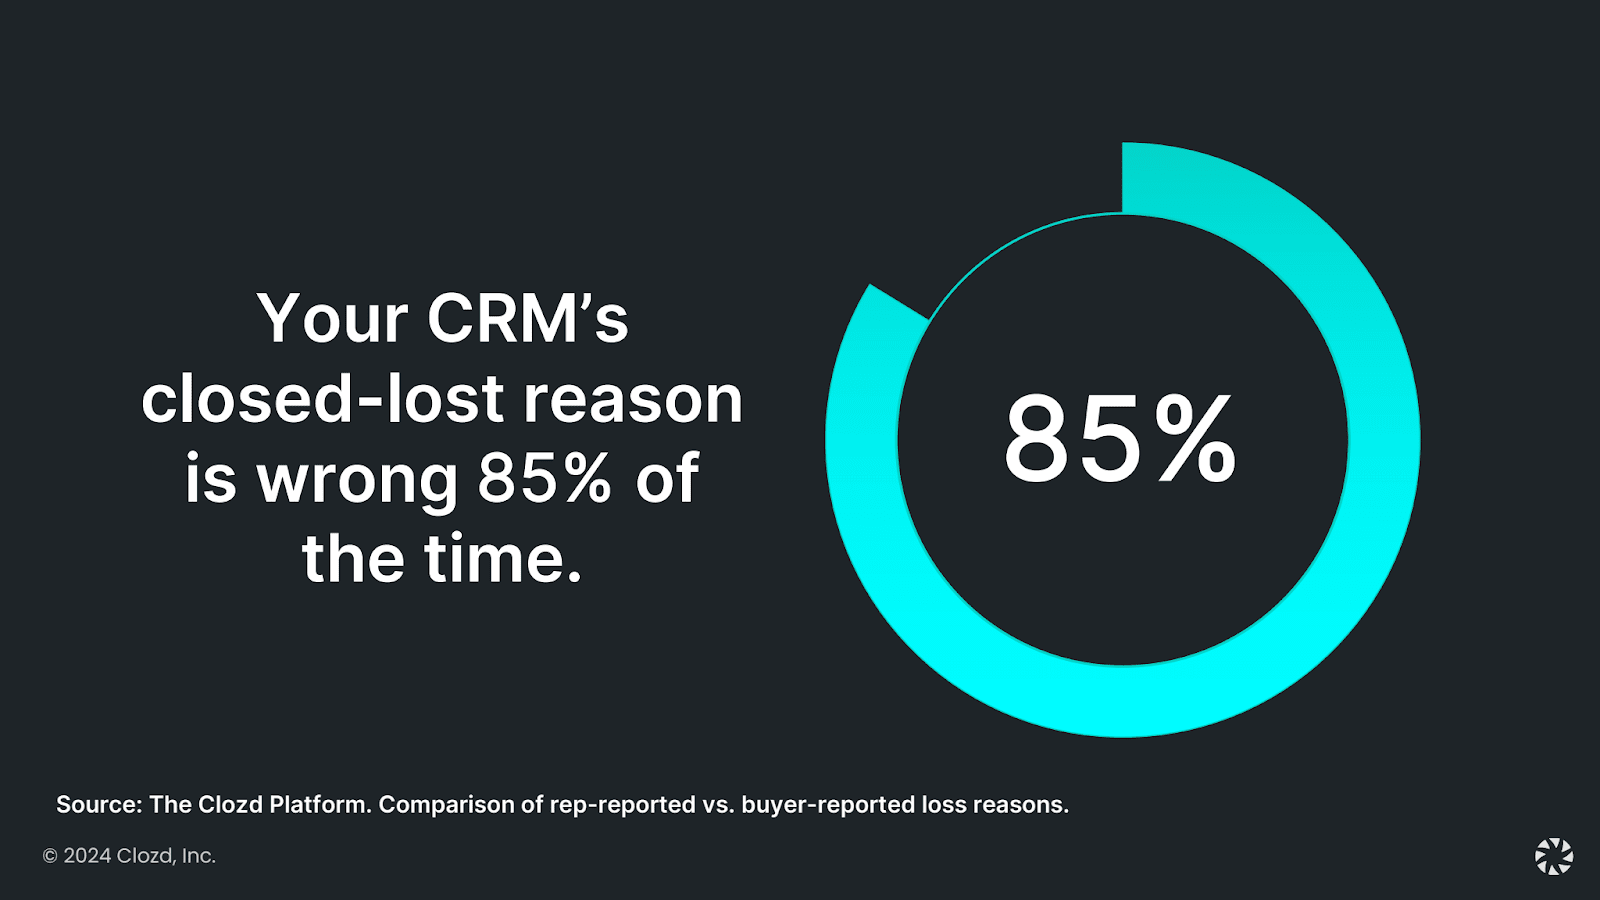 Your CRM's closed-lost reason is wrong 85% of the time.